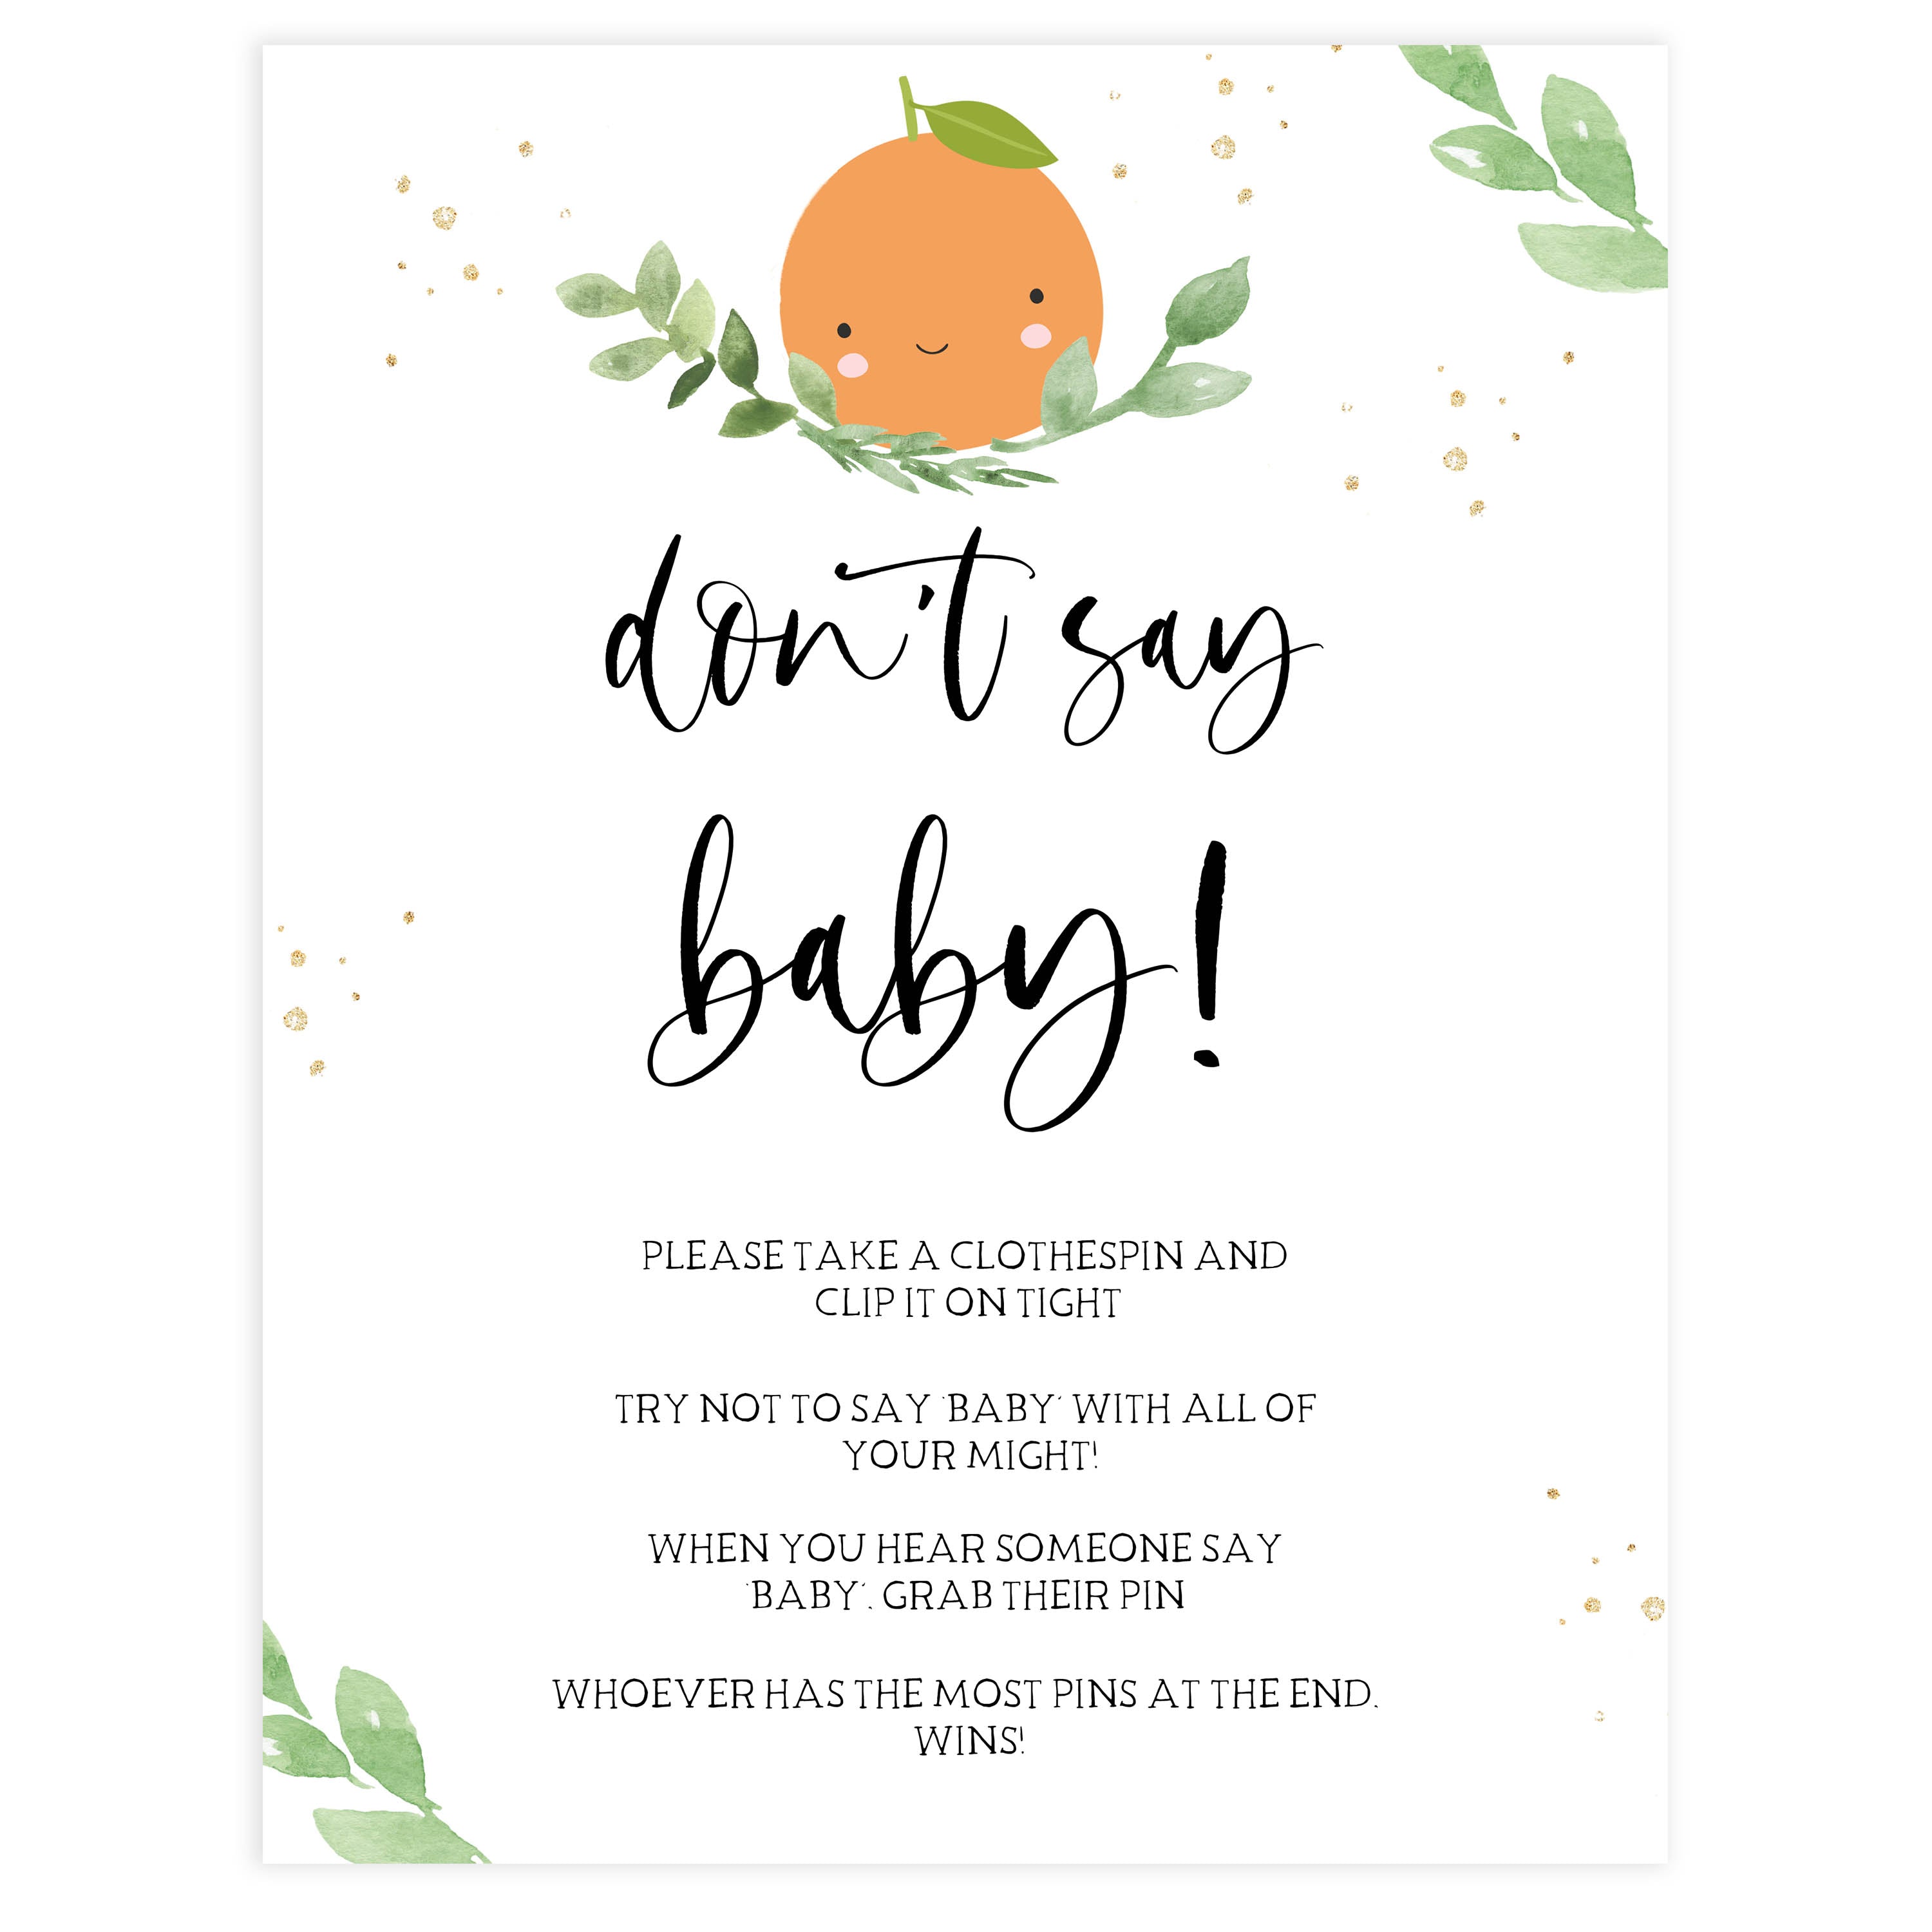 dont say baby baby game, Printable baby shower games, little cutie baby games, baby shower games, fun baby shower ideas, top baby shower ideas, little cutie baby shower, baby shower games, fun little cutie baby shower ideas